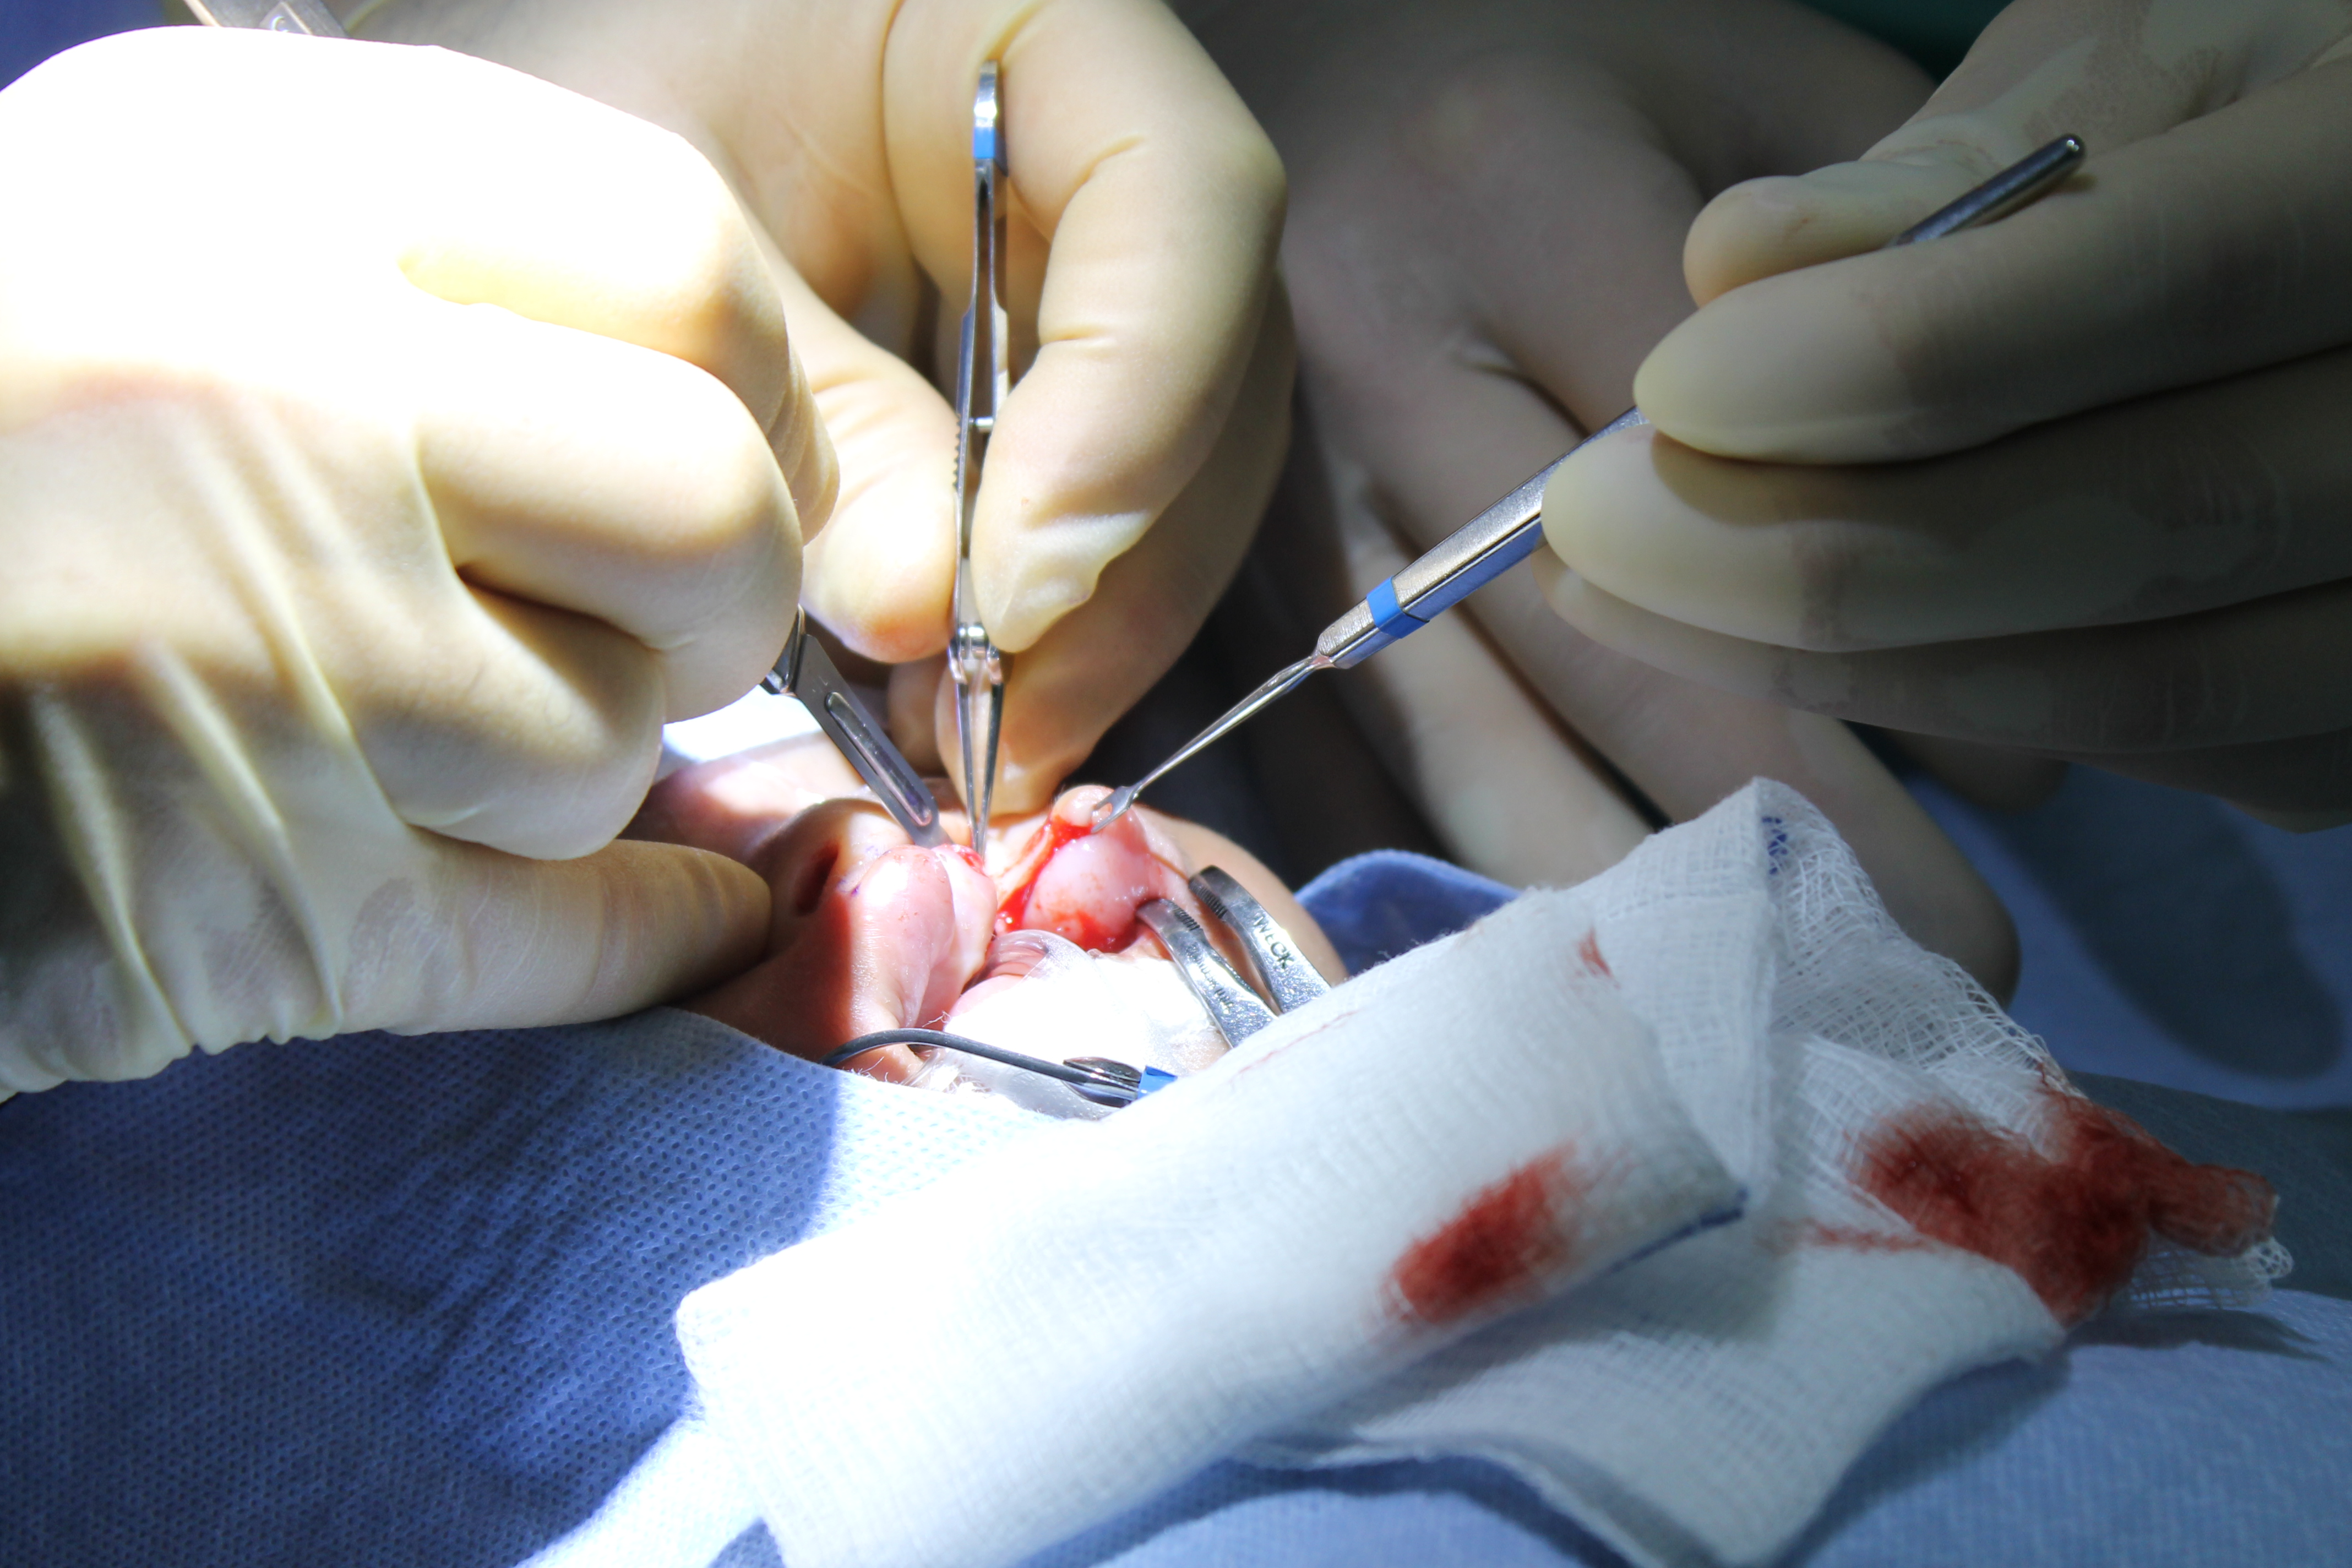 Dr. Brian works to bring the two sides of her lip together, while preserving as much tissue as possible.